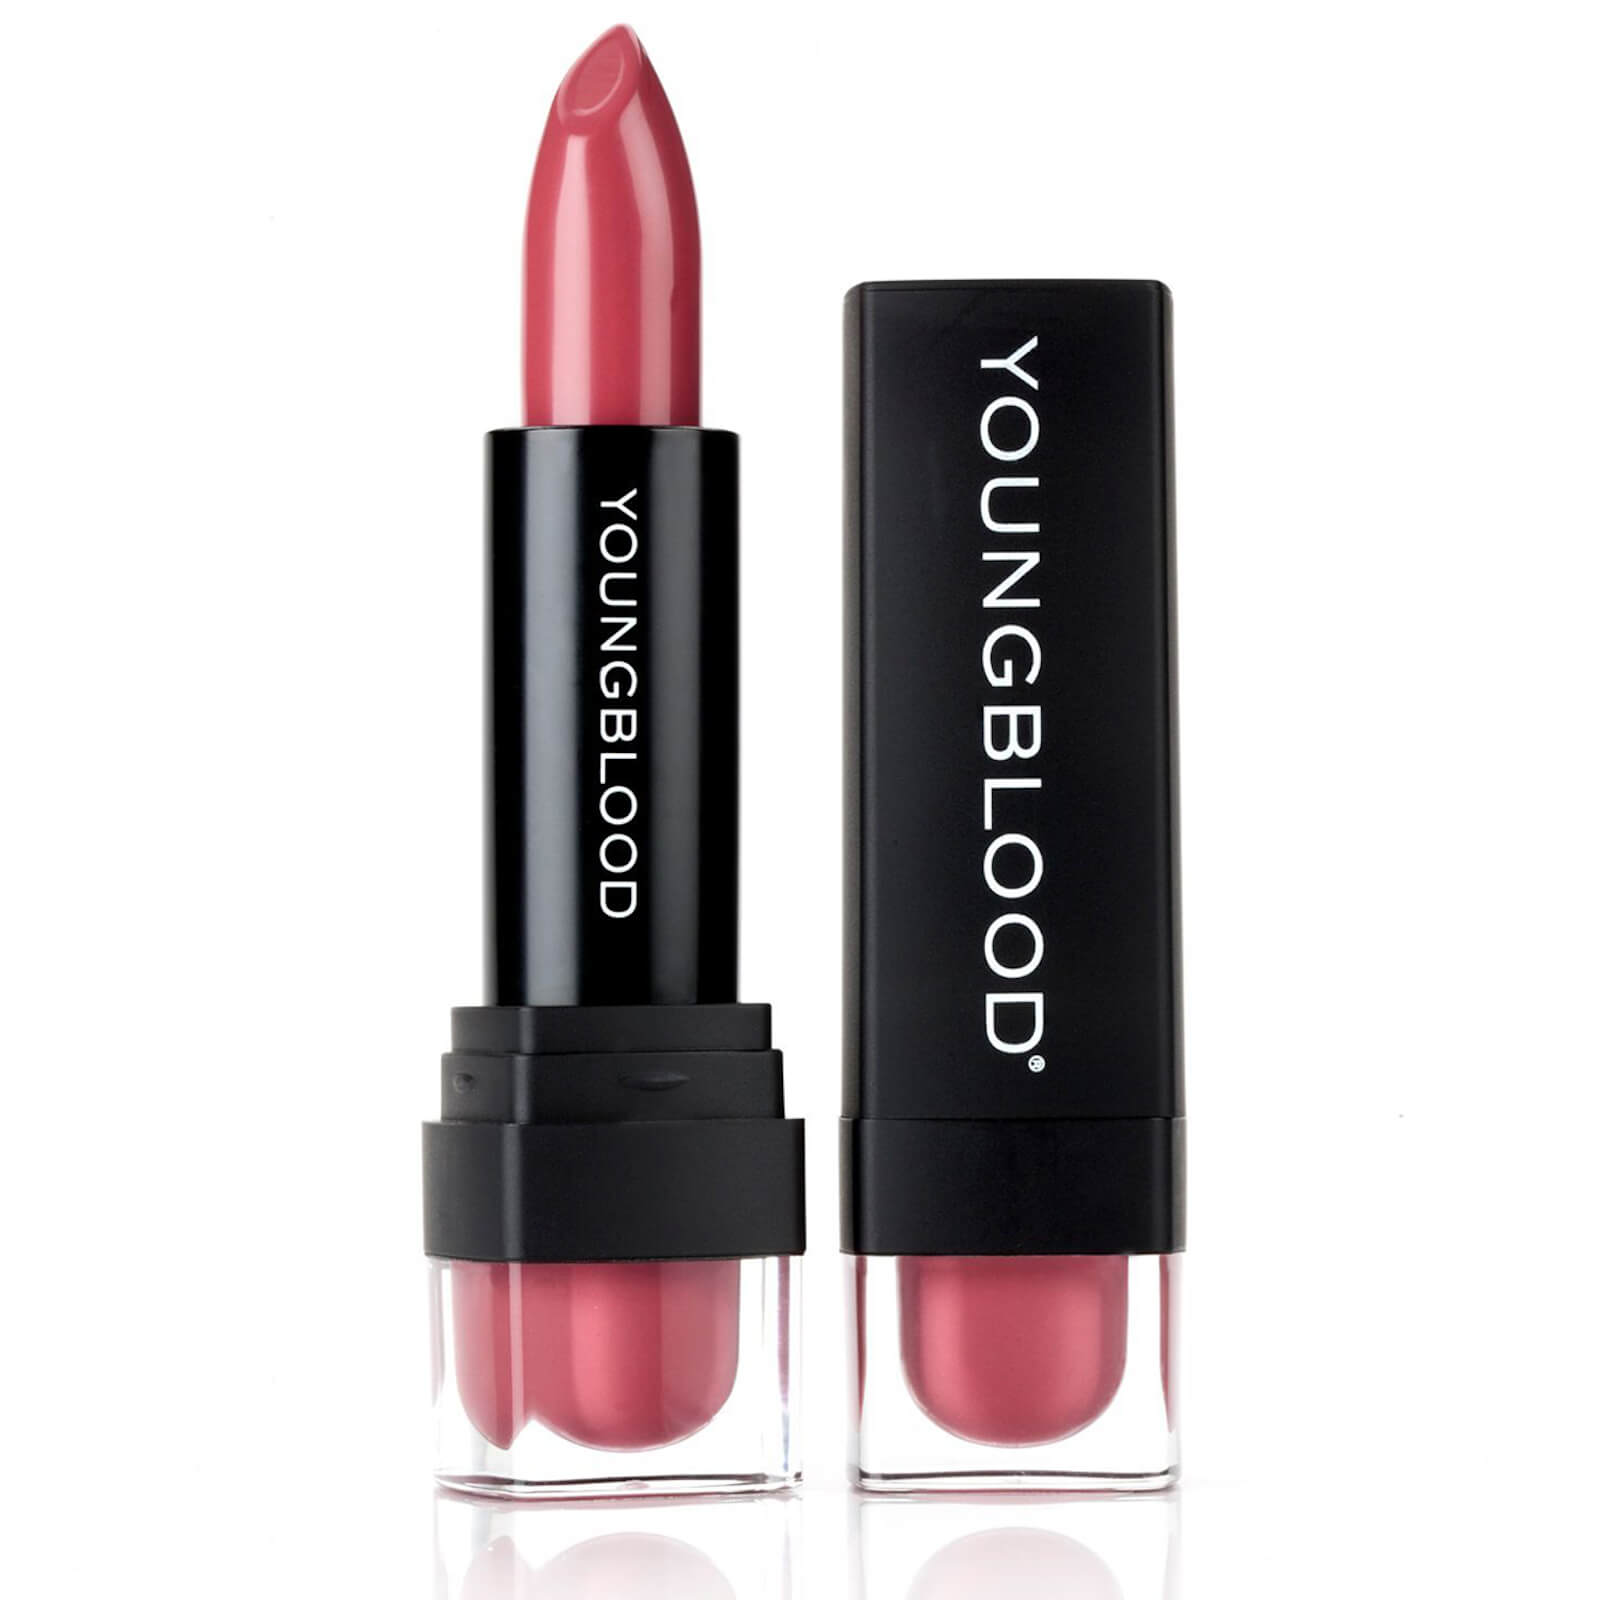 Youngblood Mineral Crème Lipstick 4g (Various Shades) - Rosewater